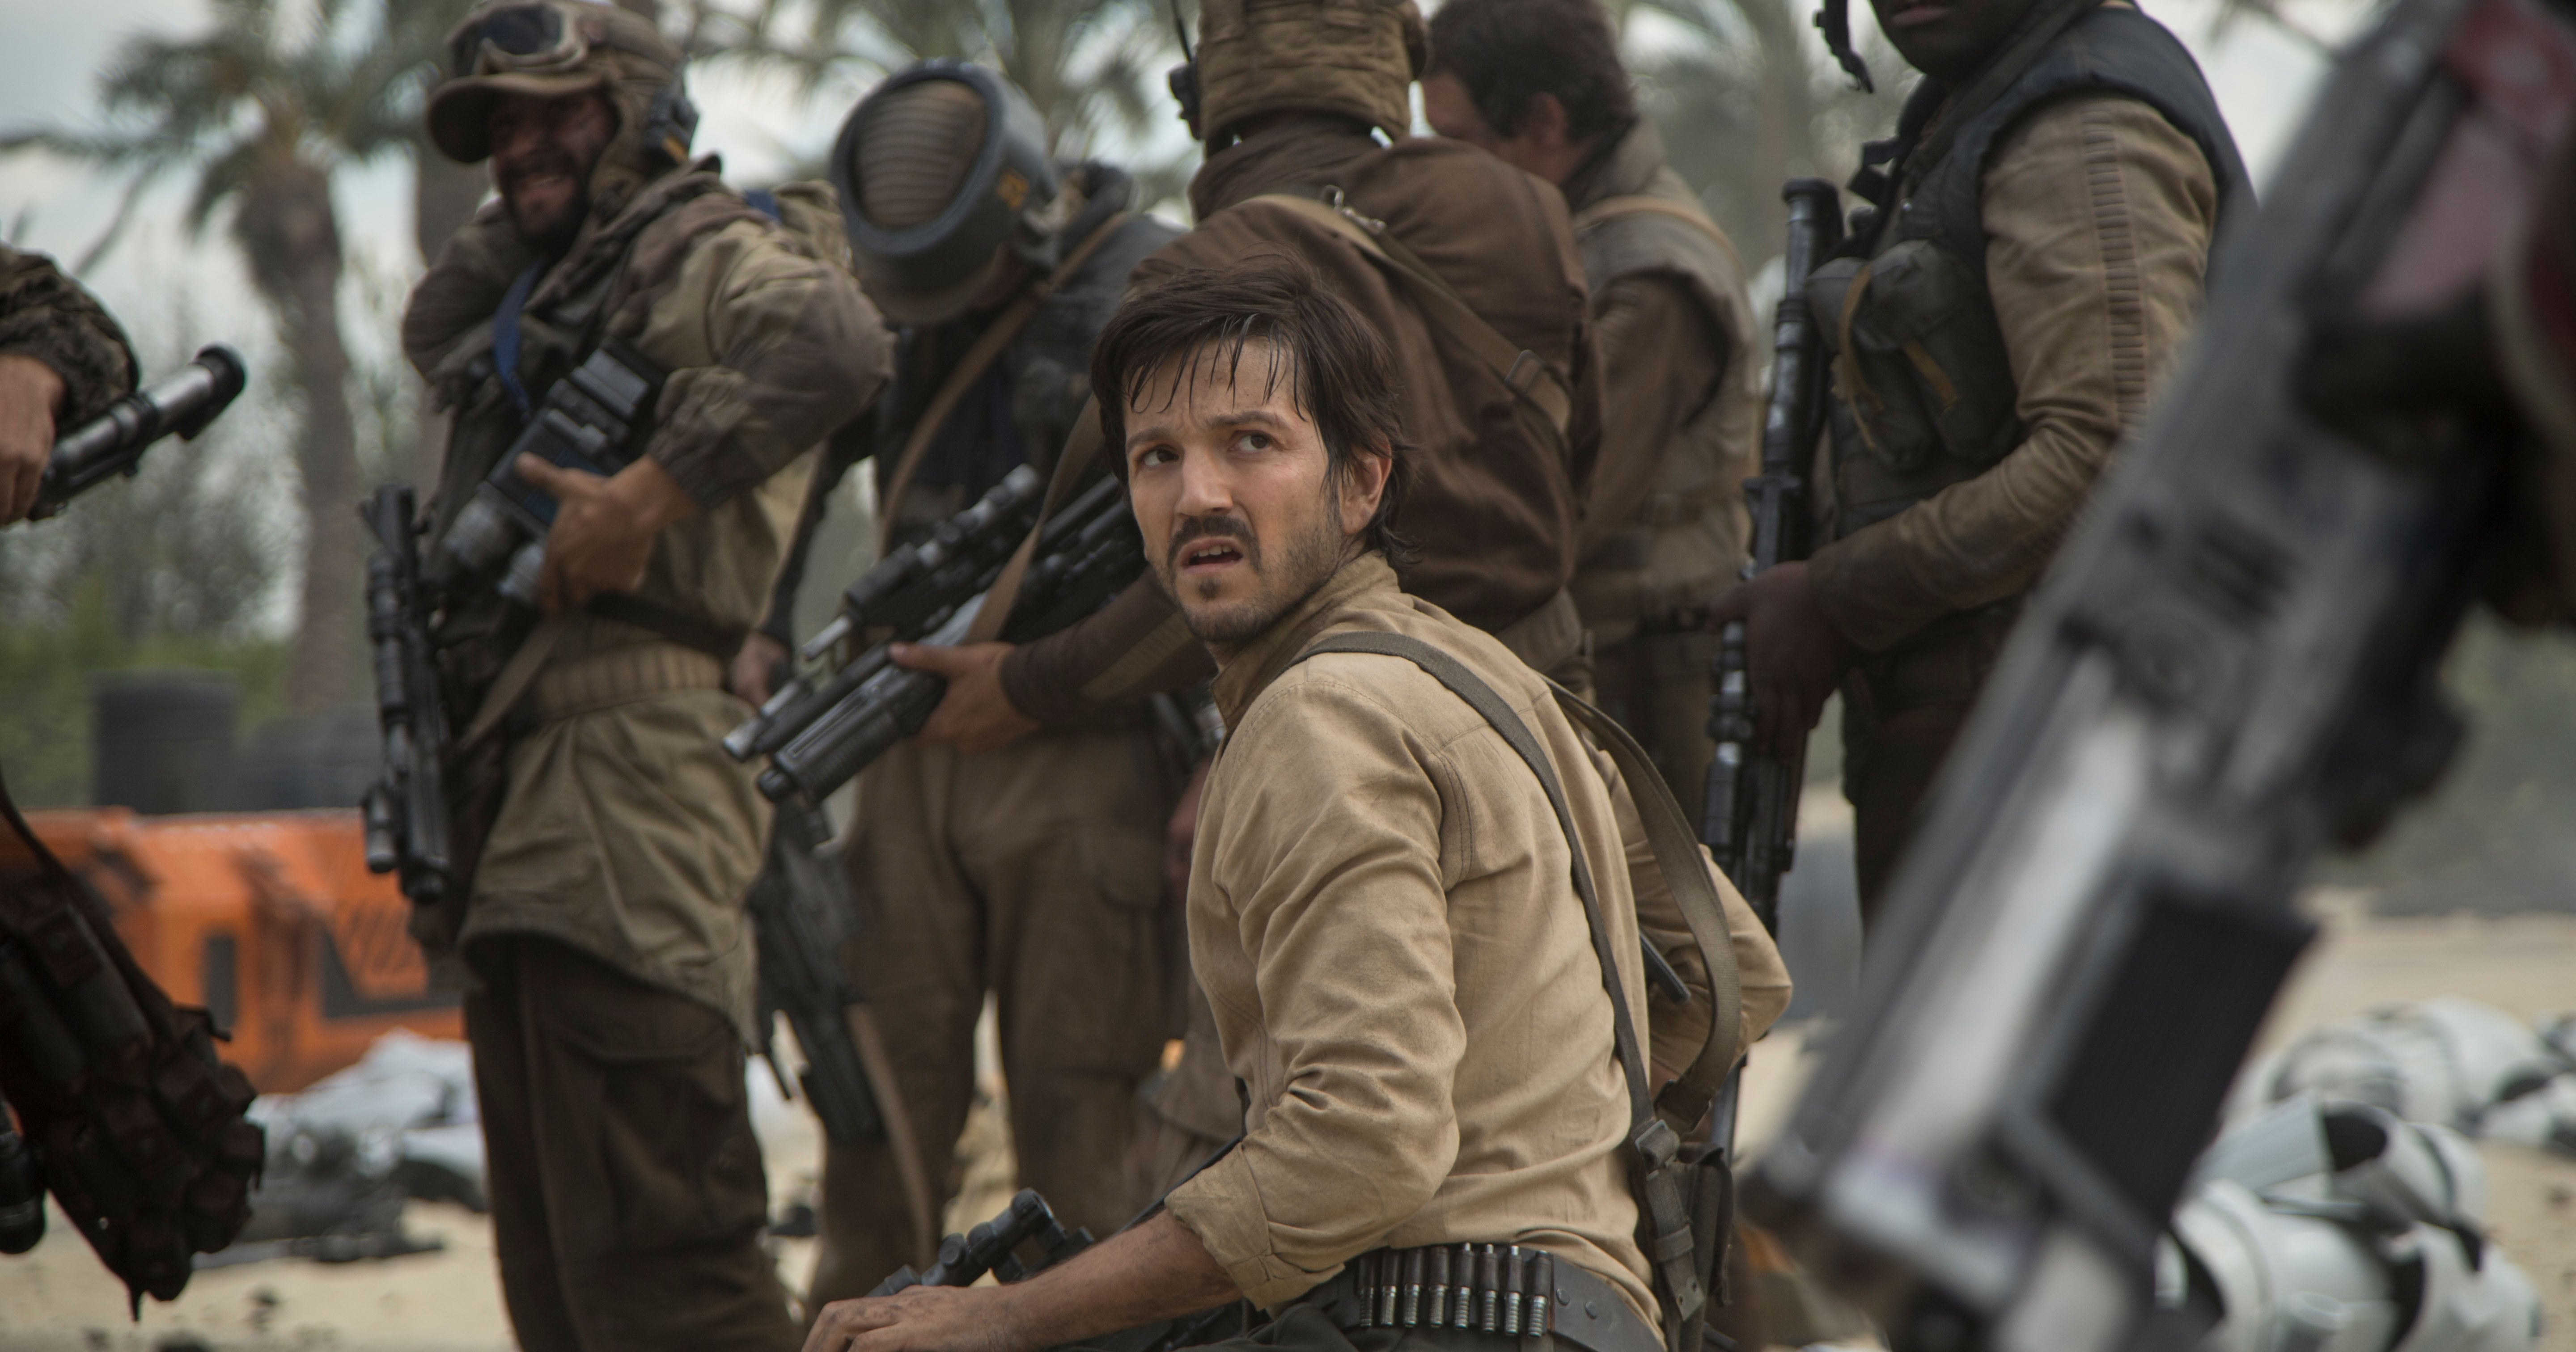 Who Is Cassian Andor From Star Wars?